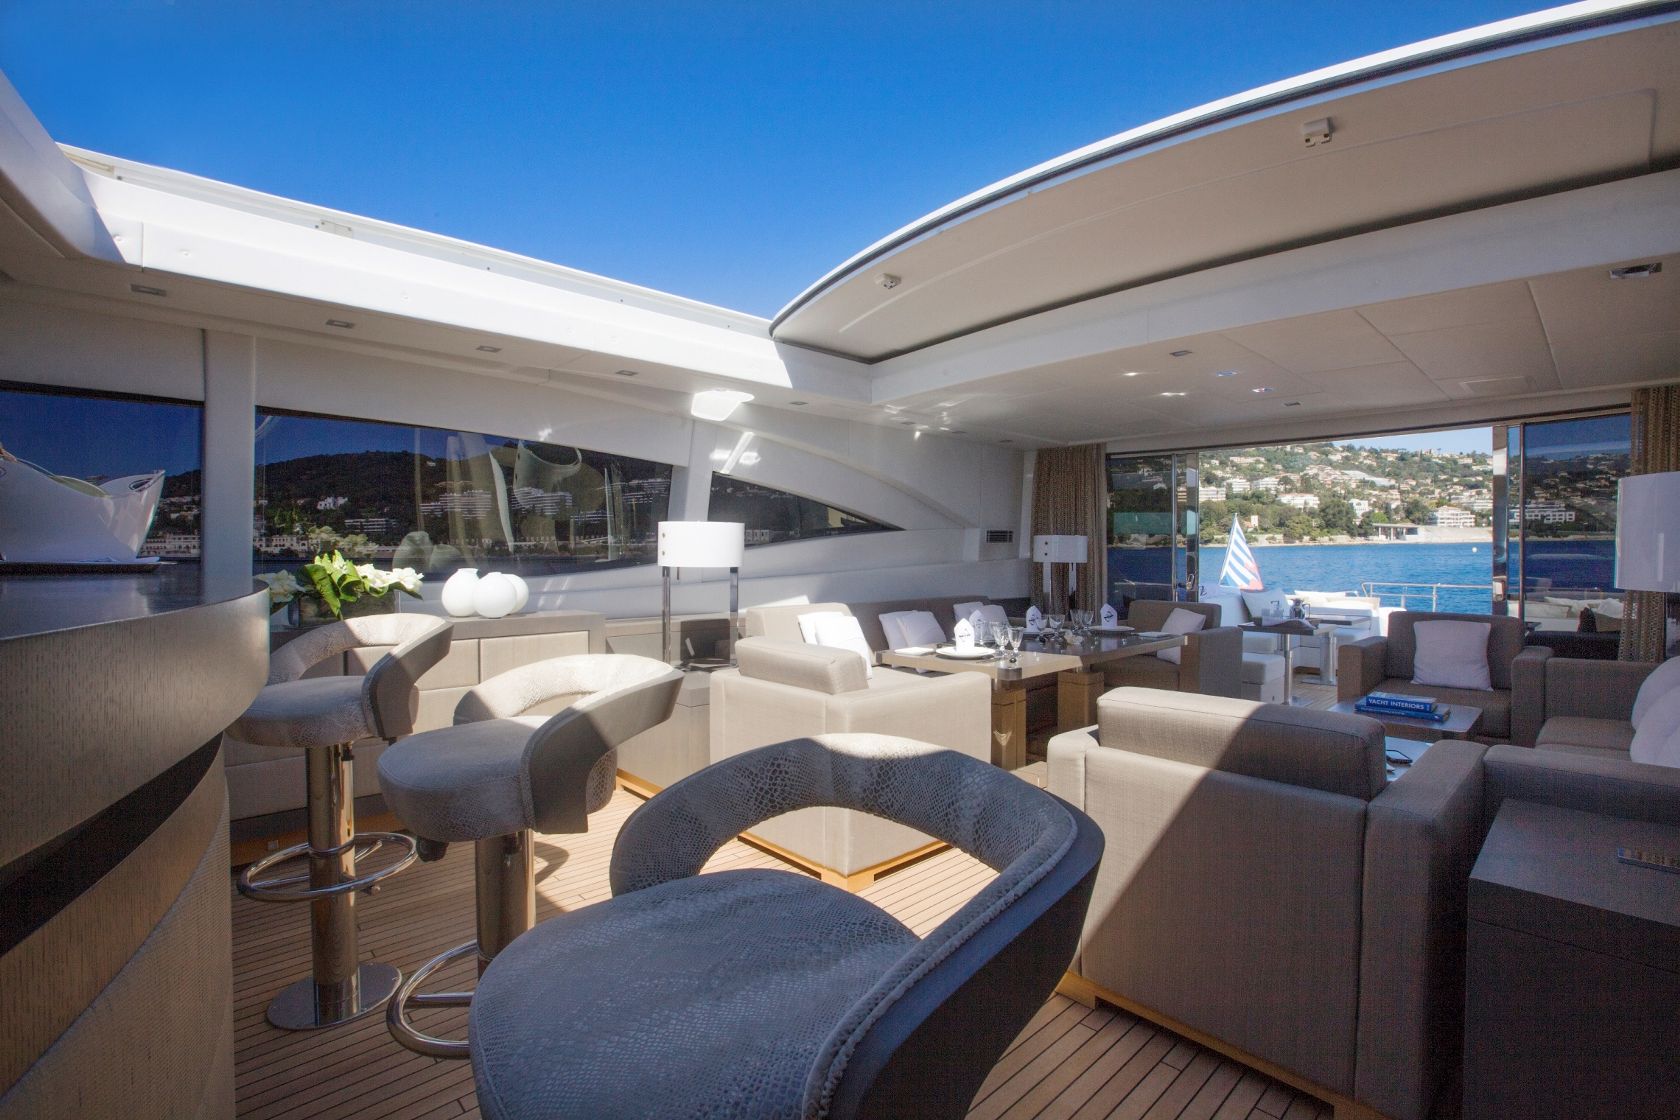 Large Sundeck With Retractable Rooftop